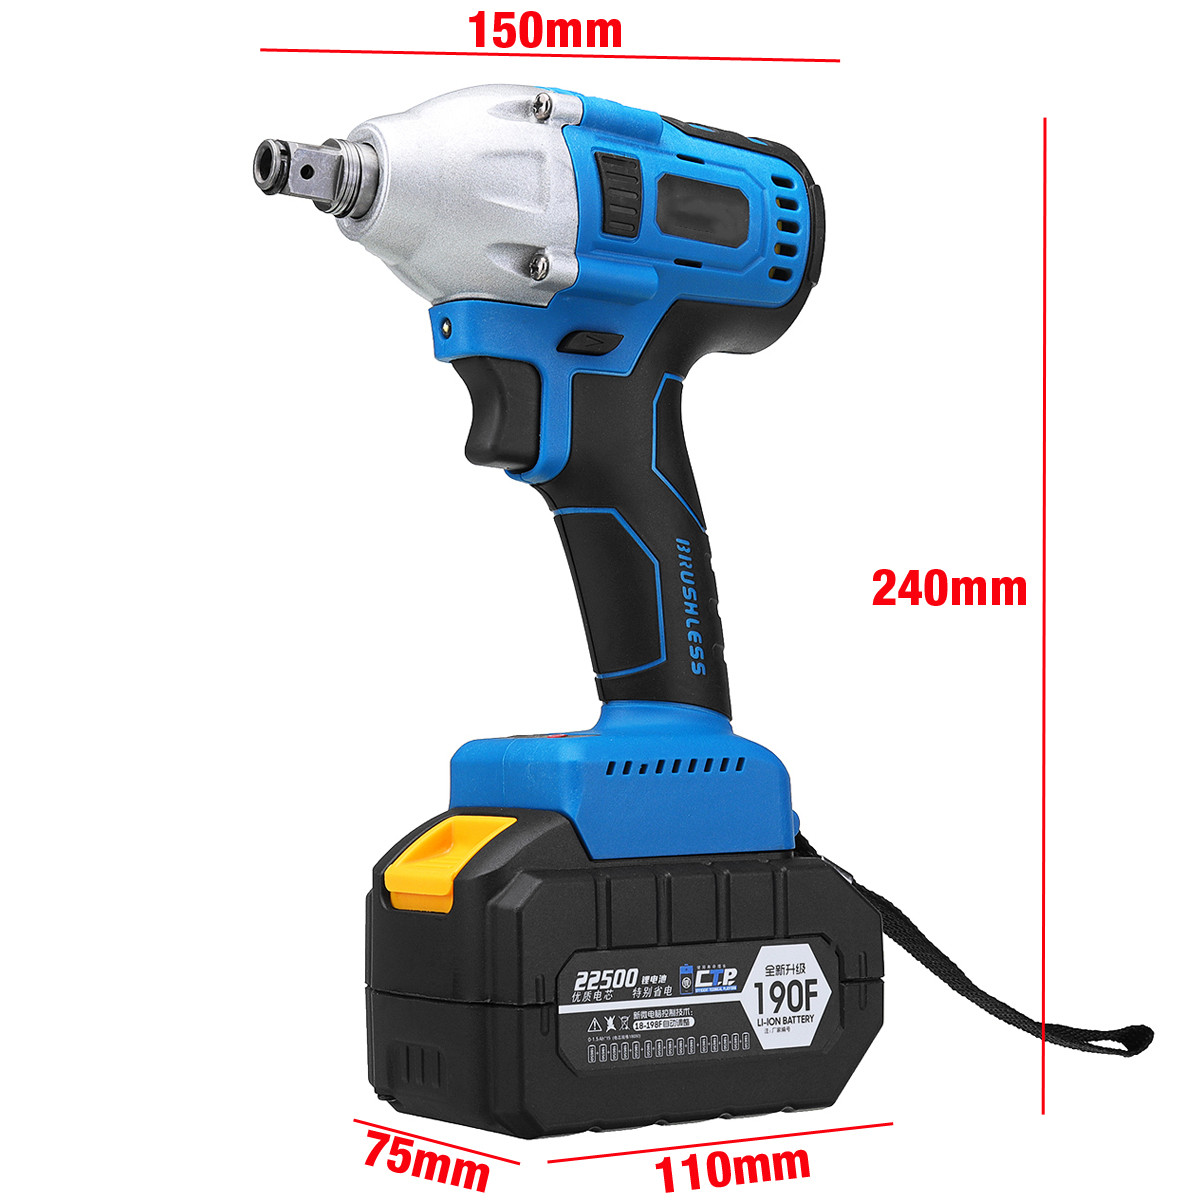 15000200002250030000-mAh-12-Inch-Cordless-Brushless-Electric-Impact-Wrench-Screwdriver-kit-with-2-Li-1413886-10